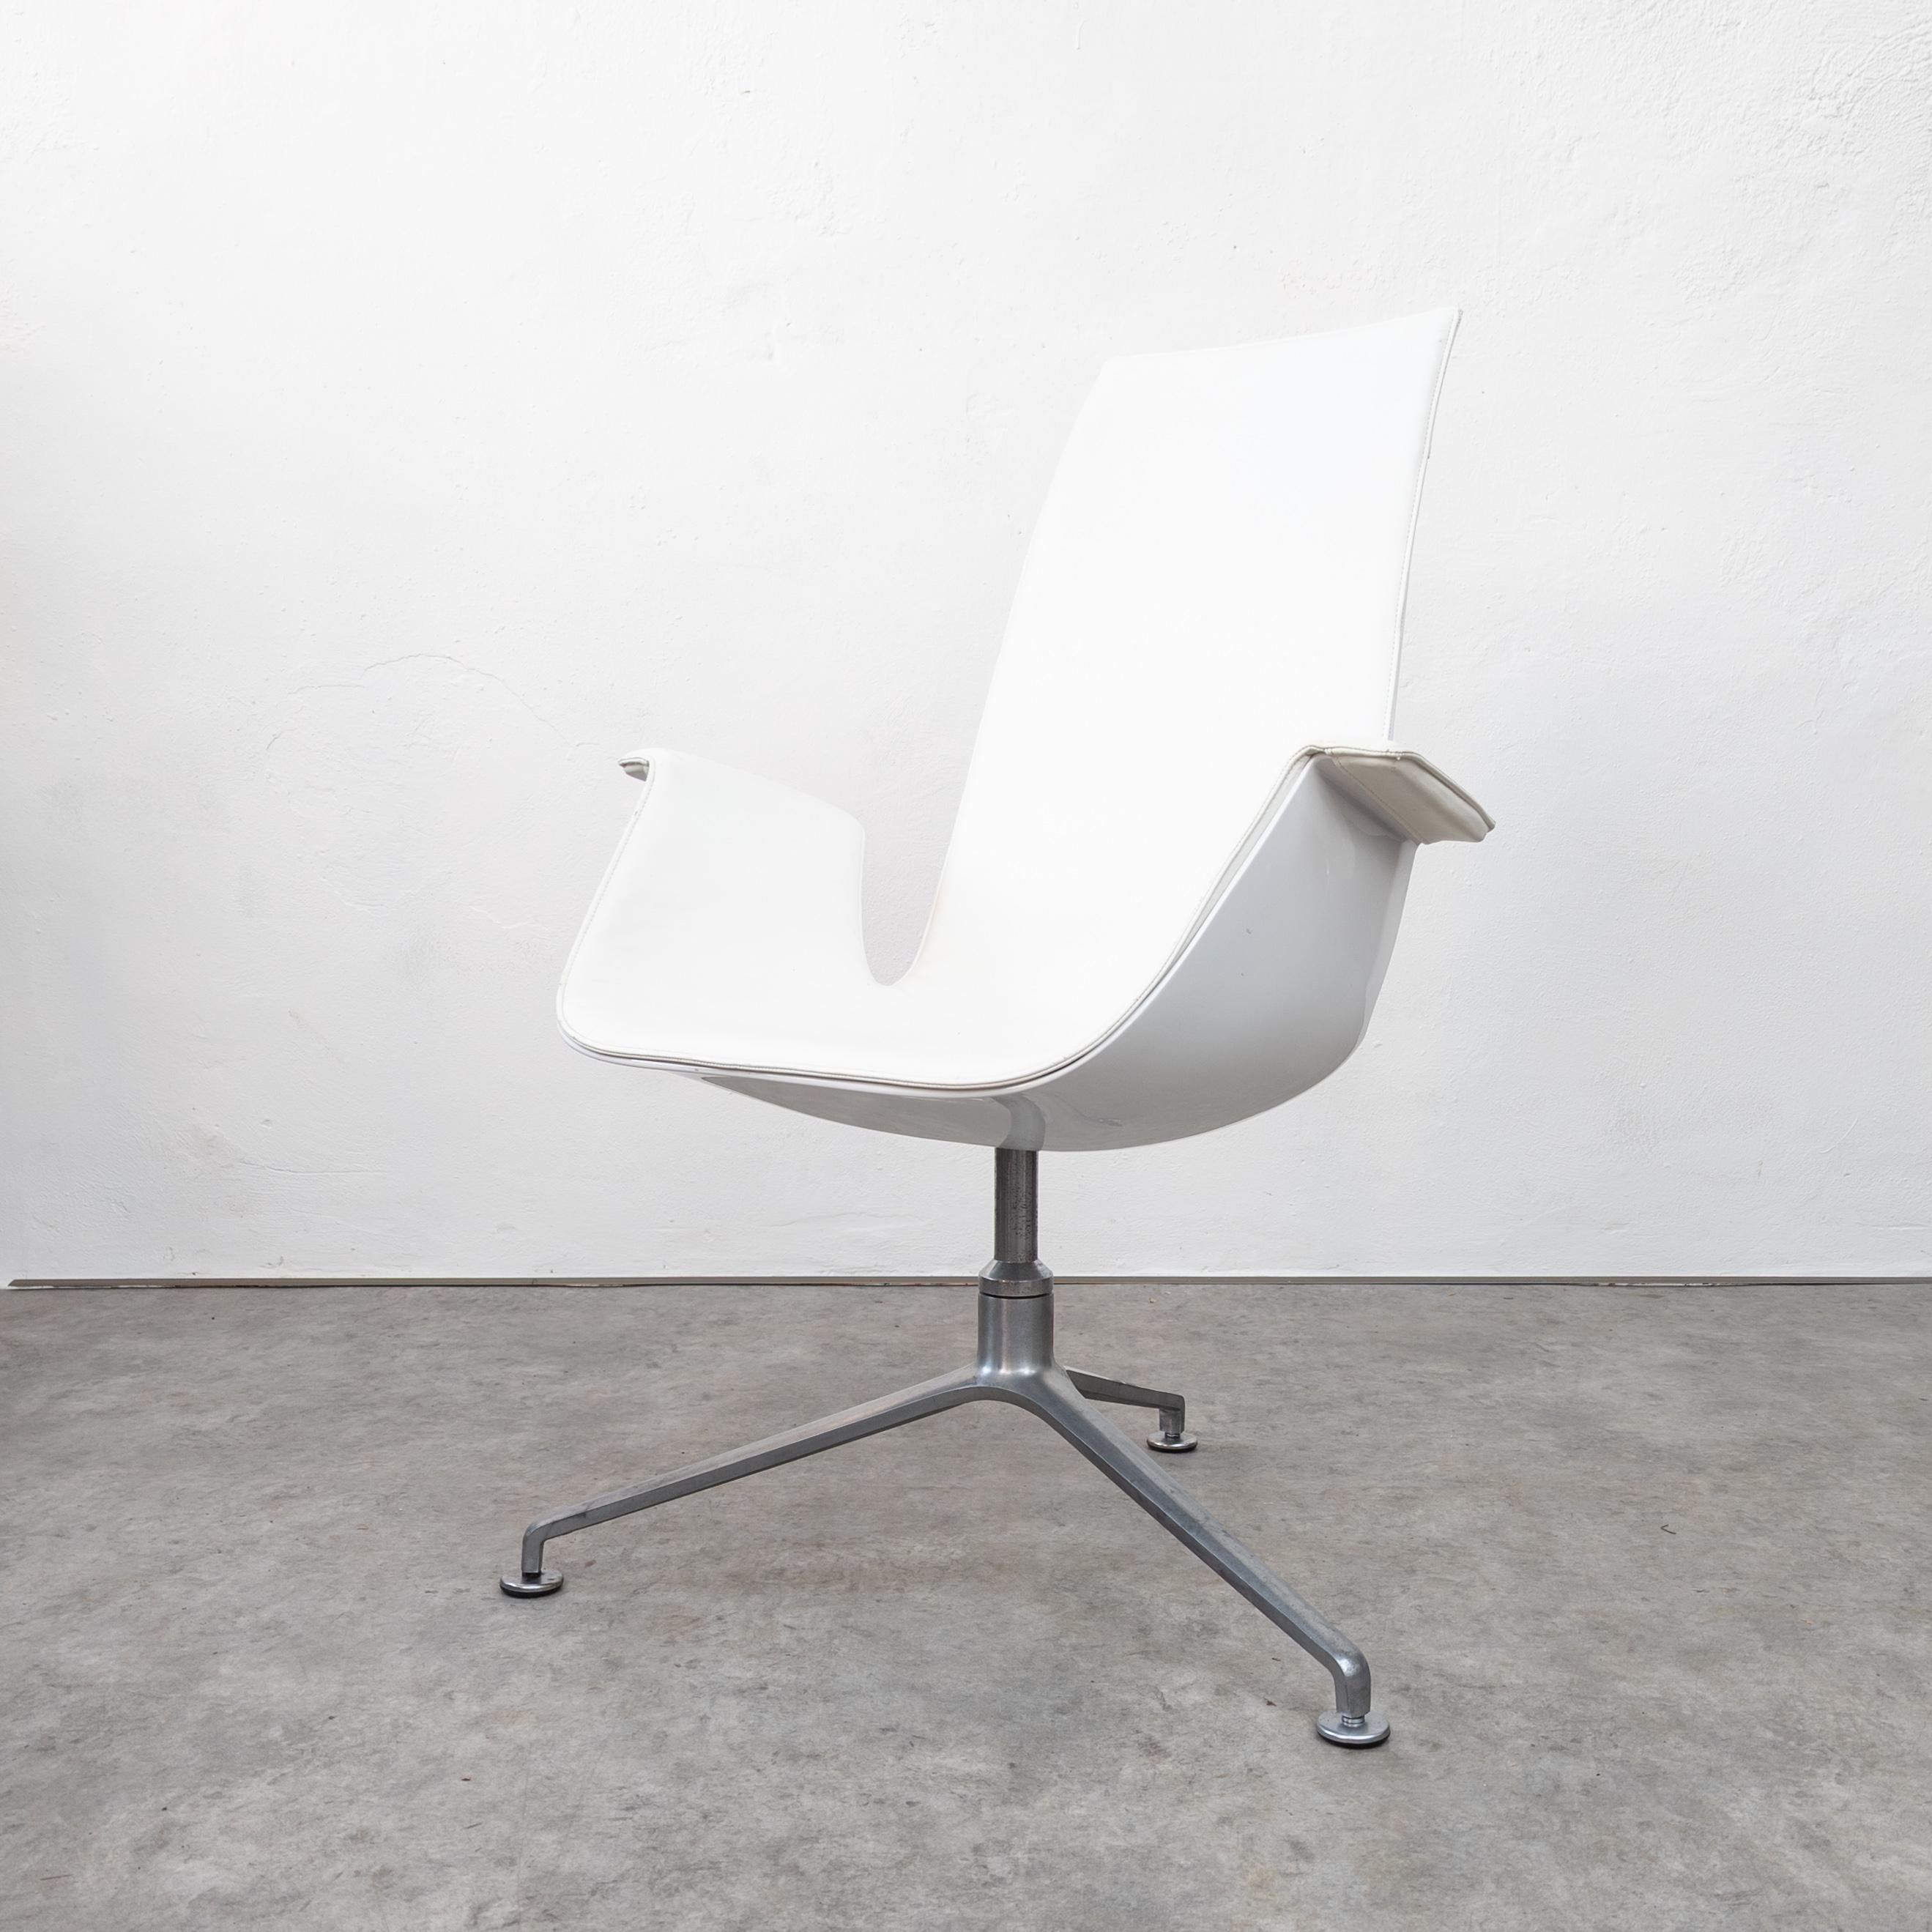 Designed by Preben Fabricius & Jørgen Kastholm for Alfred Kill International in 1960s, manufactured by Walter Knoll. Made of fiberglass shell covered by white leather on aluminum tripod base. In a good original condition with common traces of wear